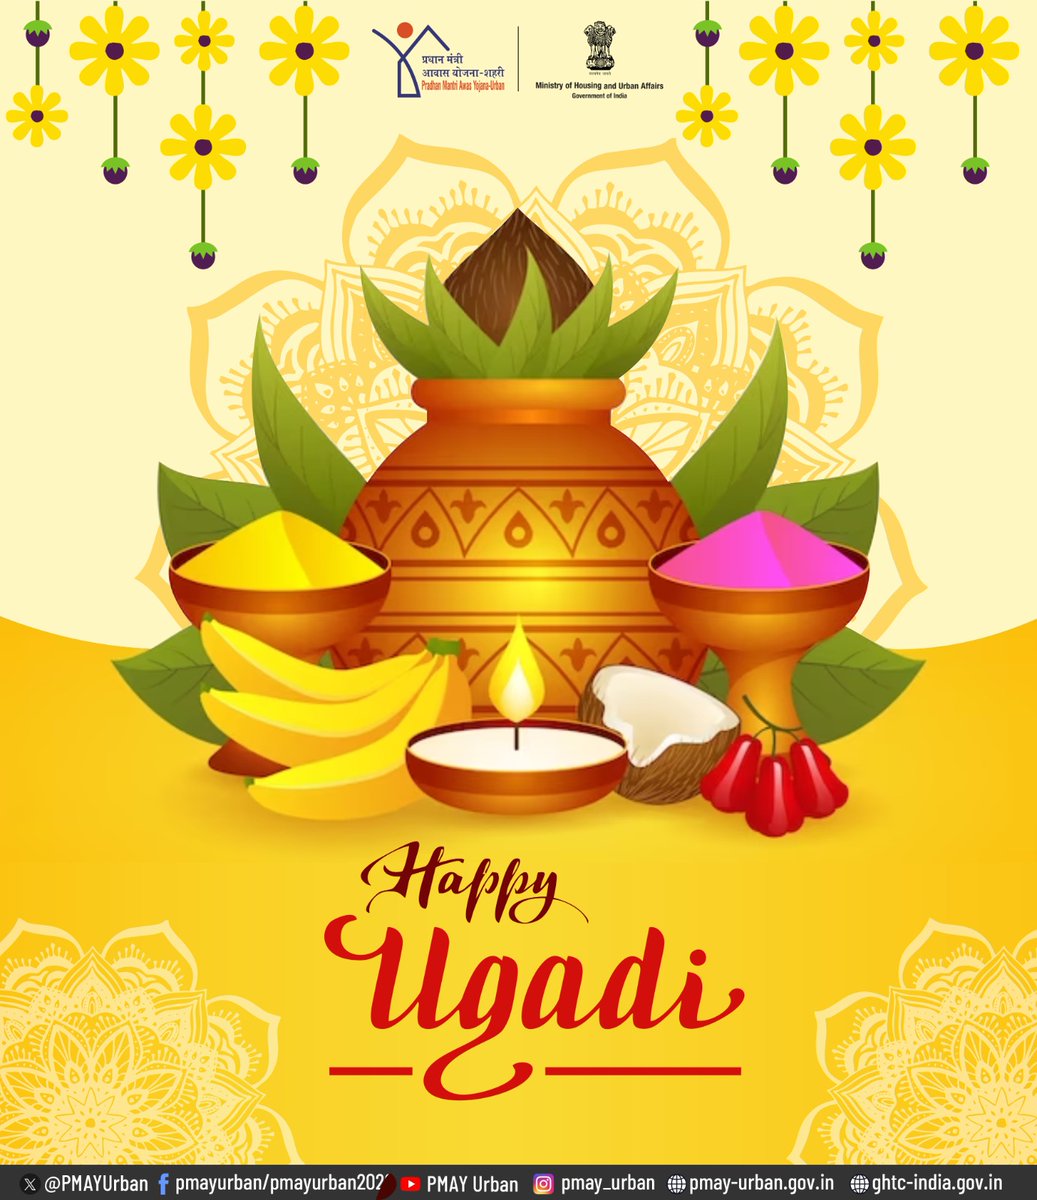 Wishing you & your family a very #HappyUgadi. May this New year bring countless joy, happiness & success in your lives. #HappyUgadi2024 #Ugadi #Ugadi2024 #UgadiFestival